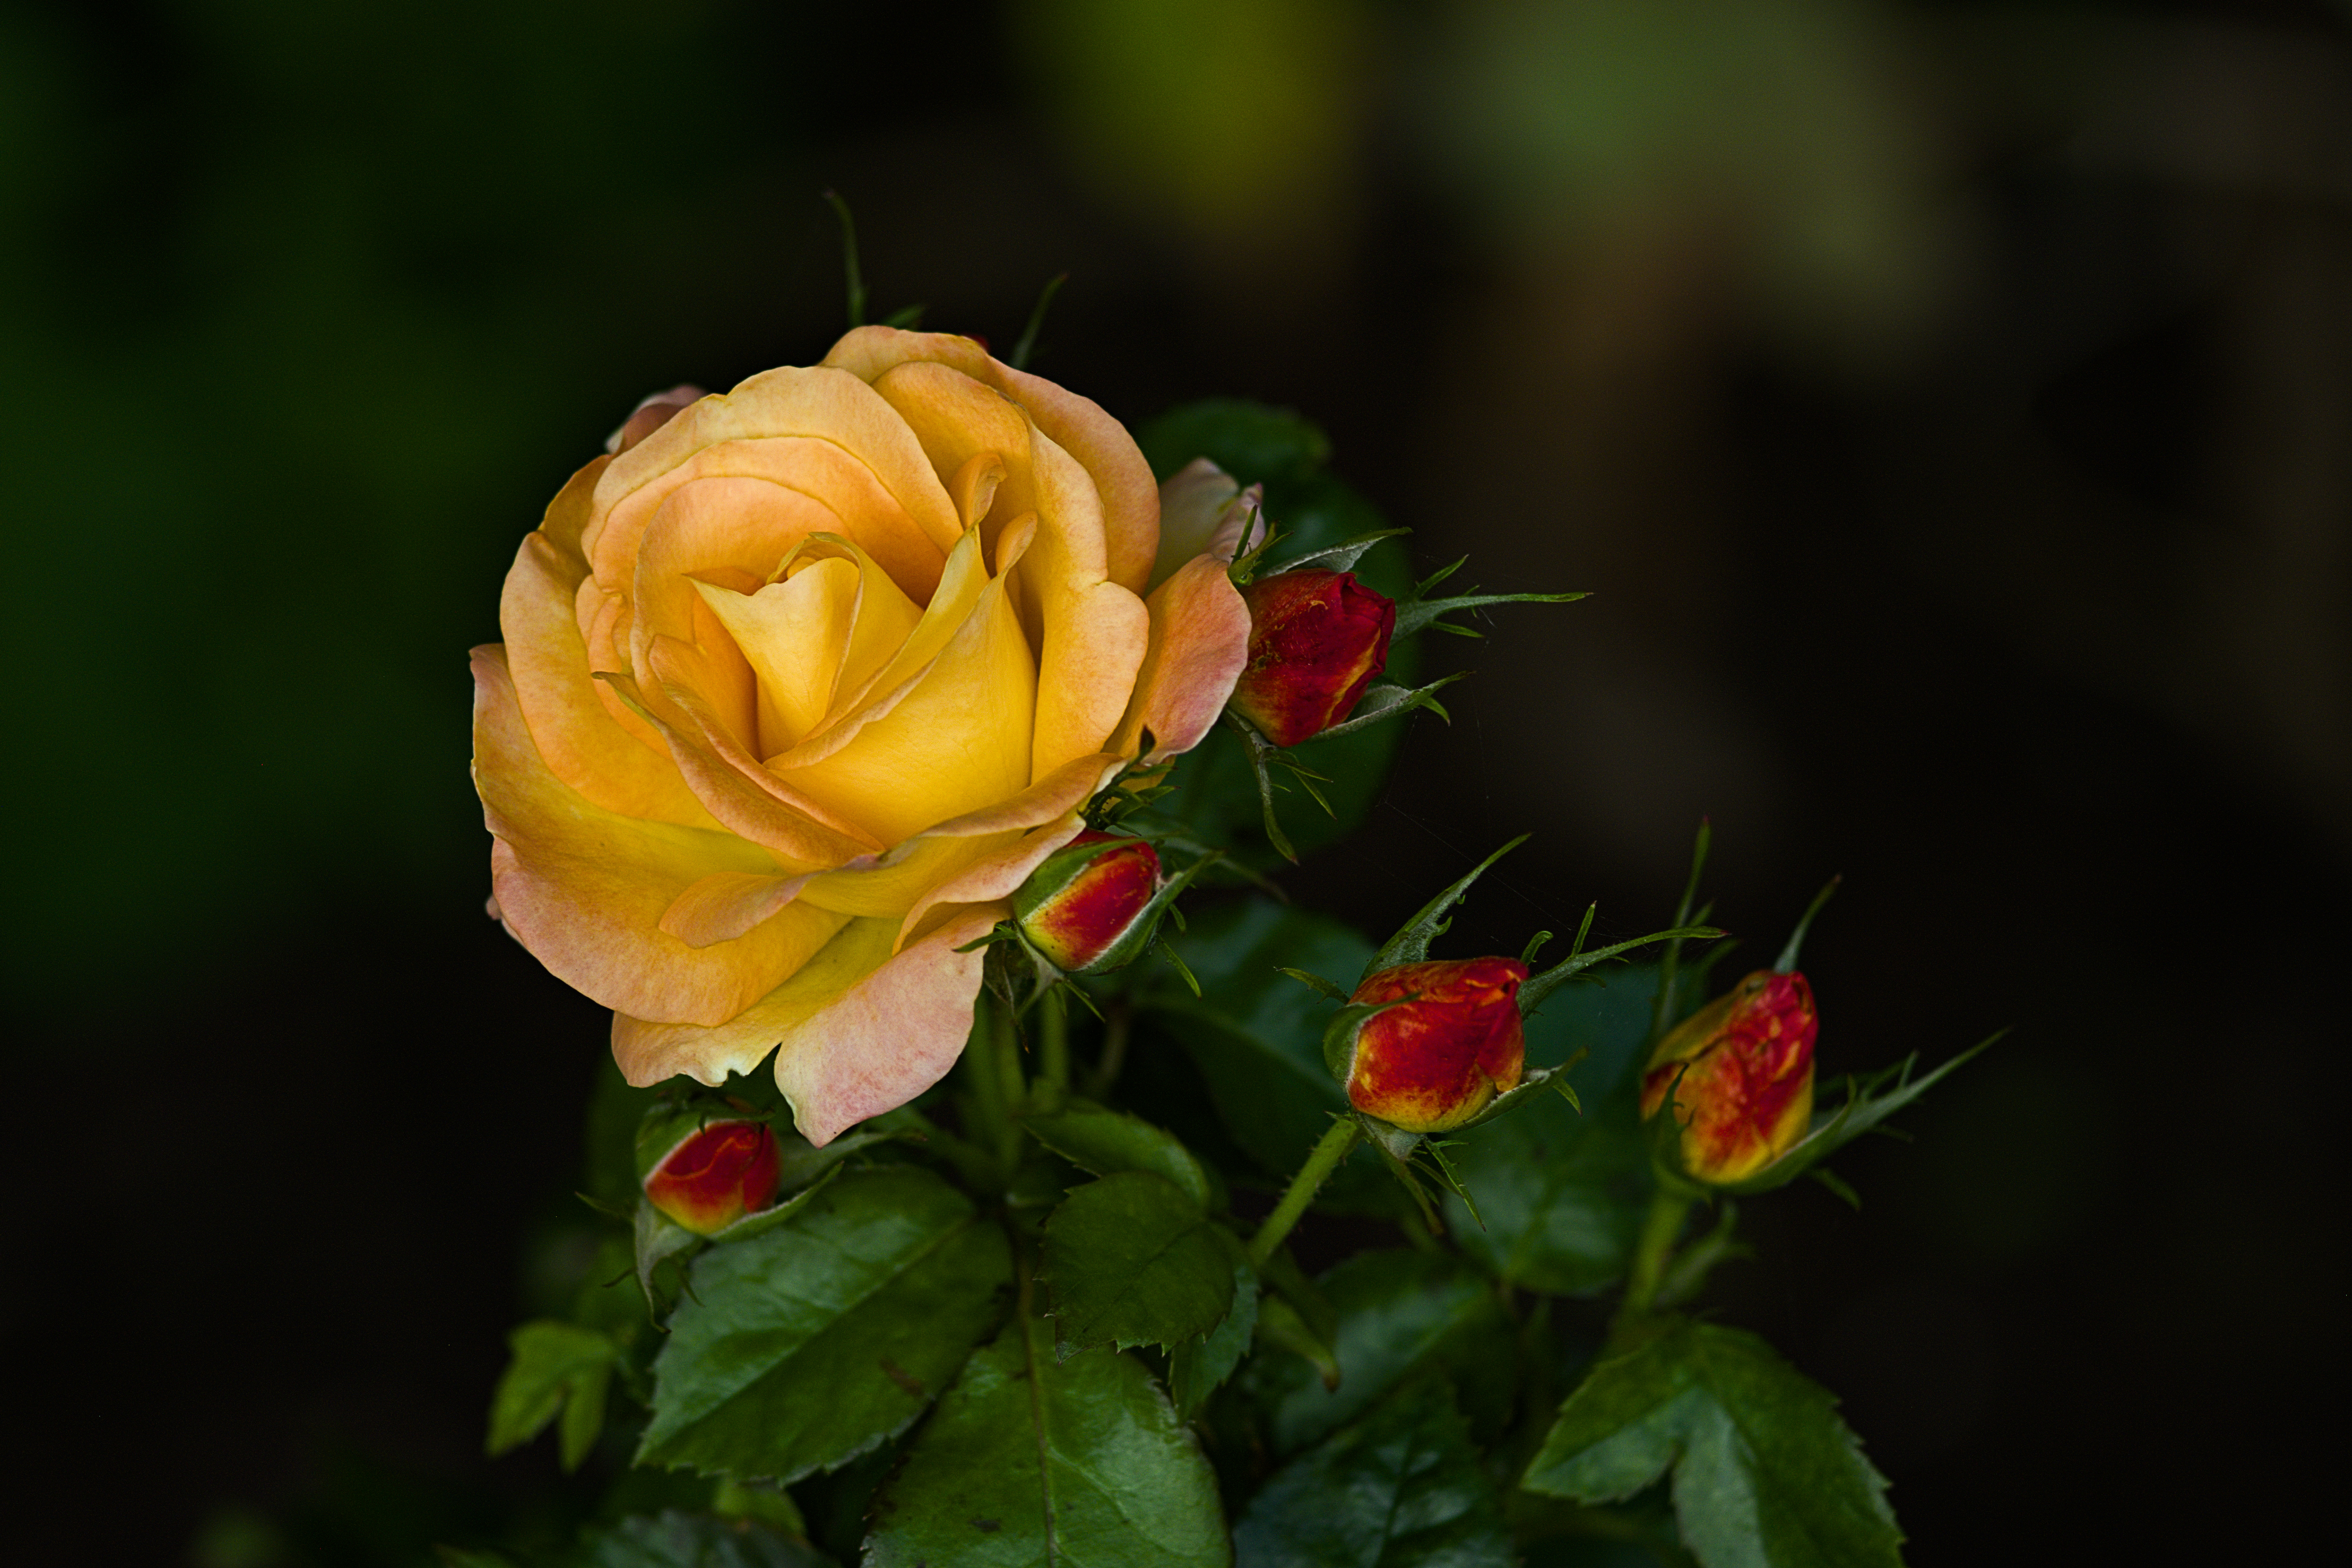 General 5000x3333 flowers nature depth of field blurred yellow red rose wild rose photography plants closeup